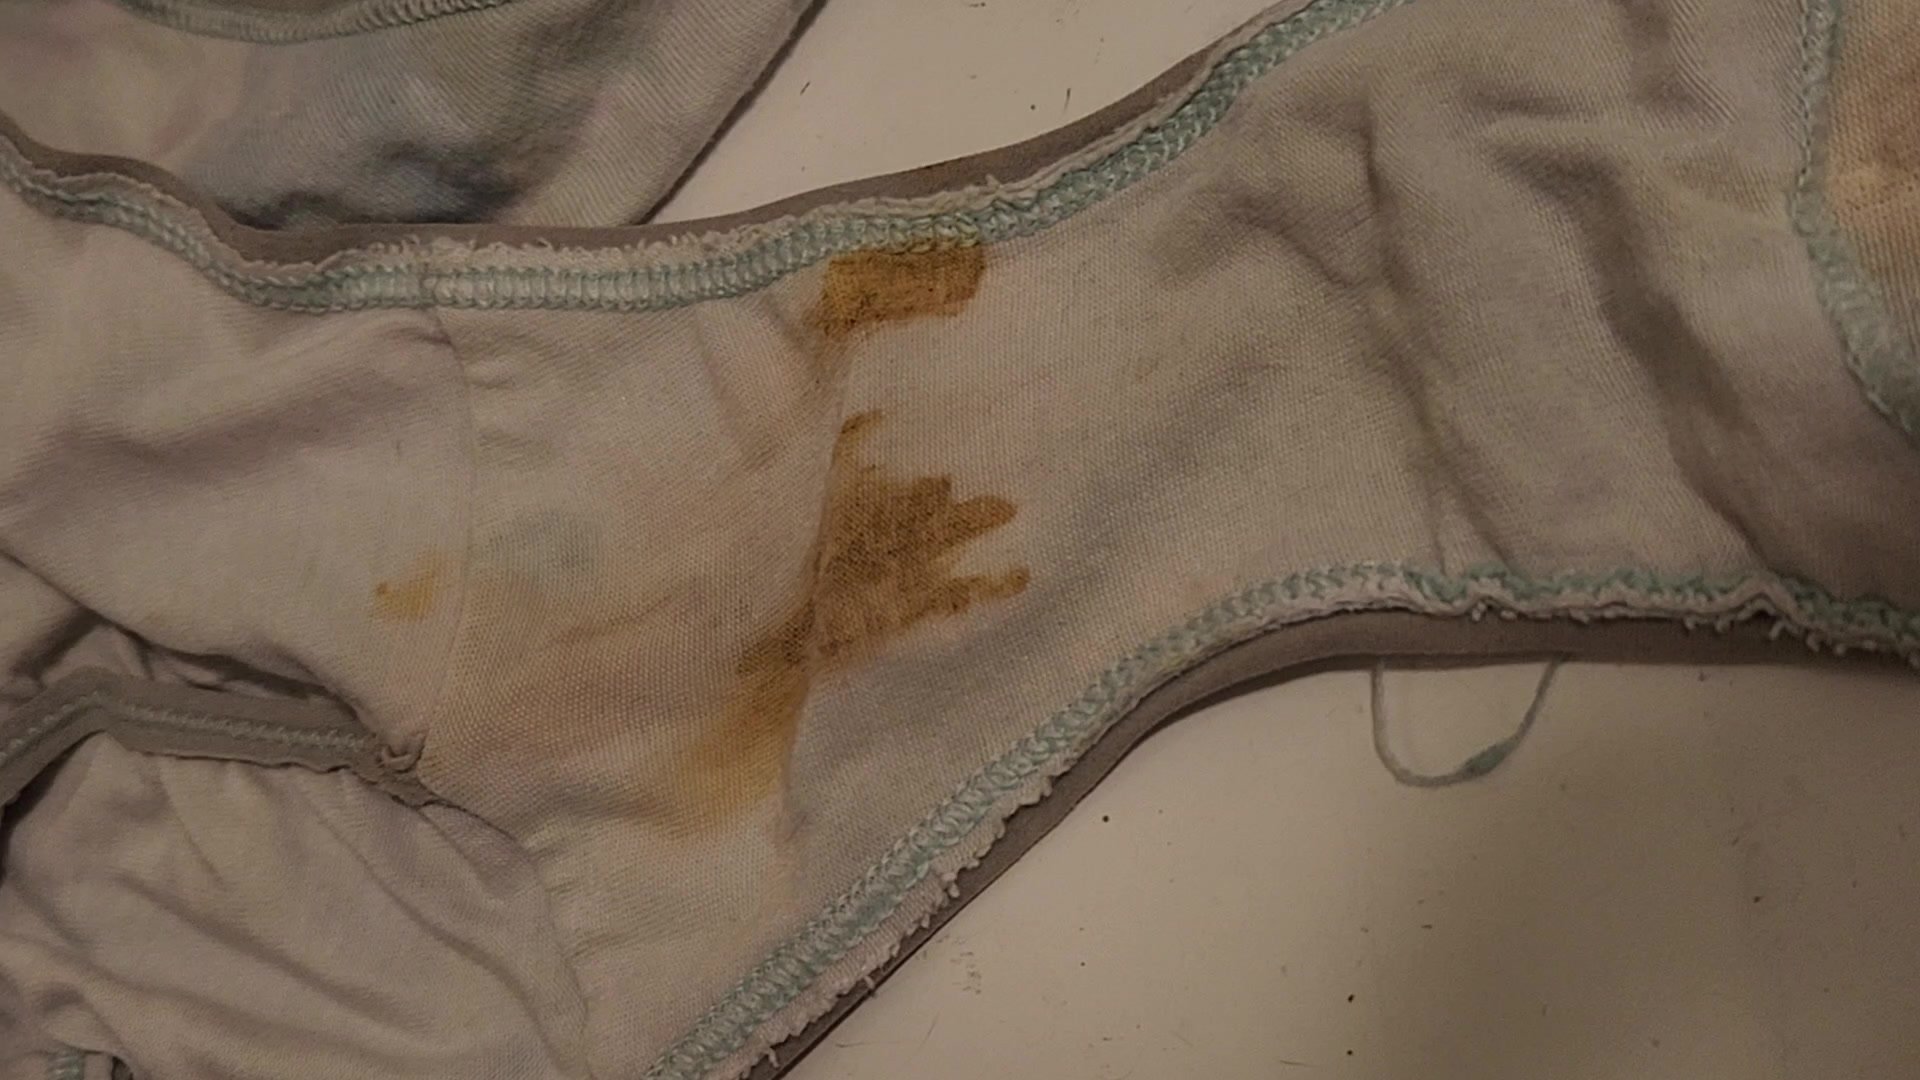 Wife's dirty panty after working all day